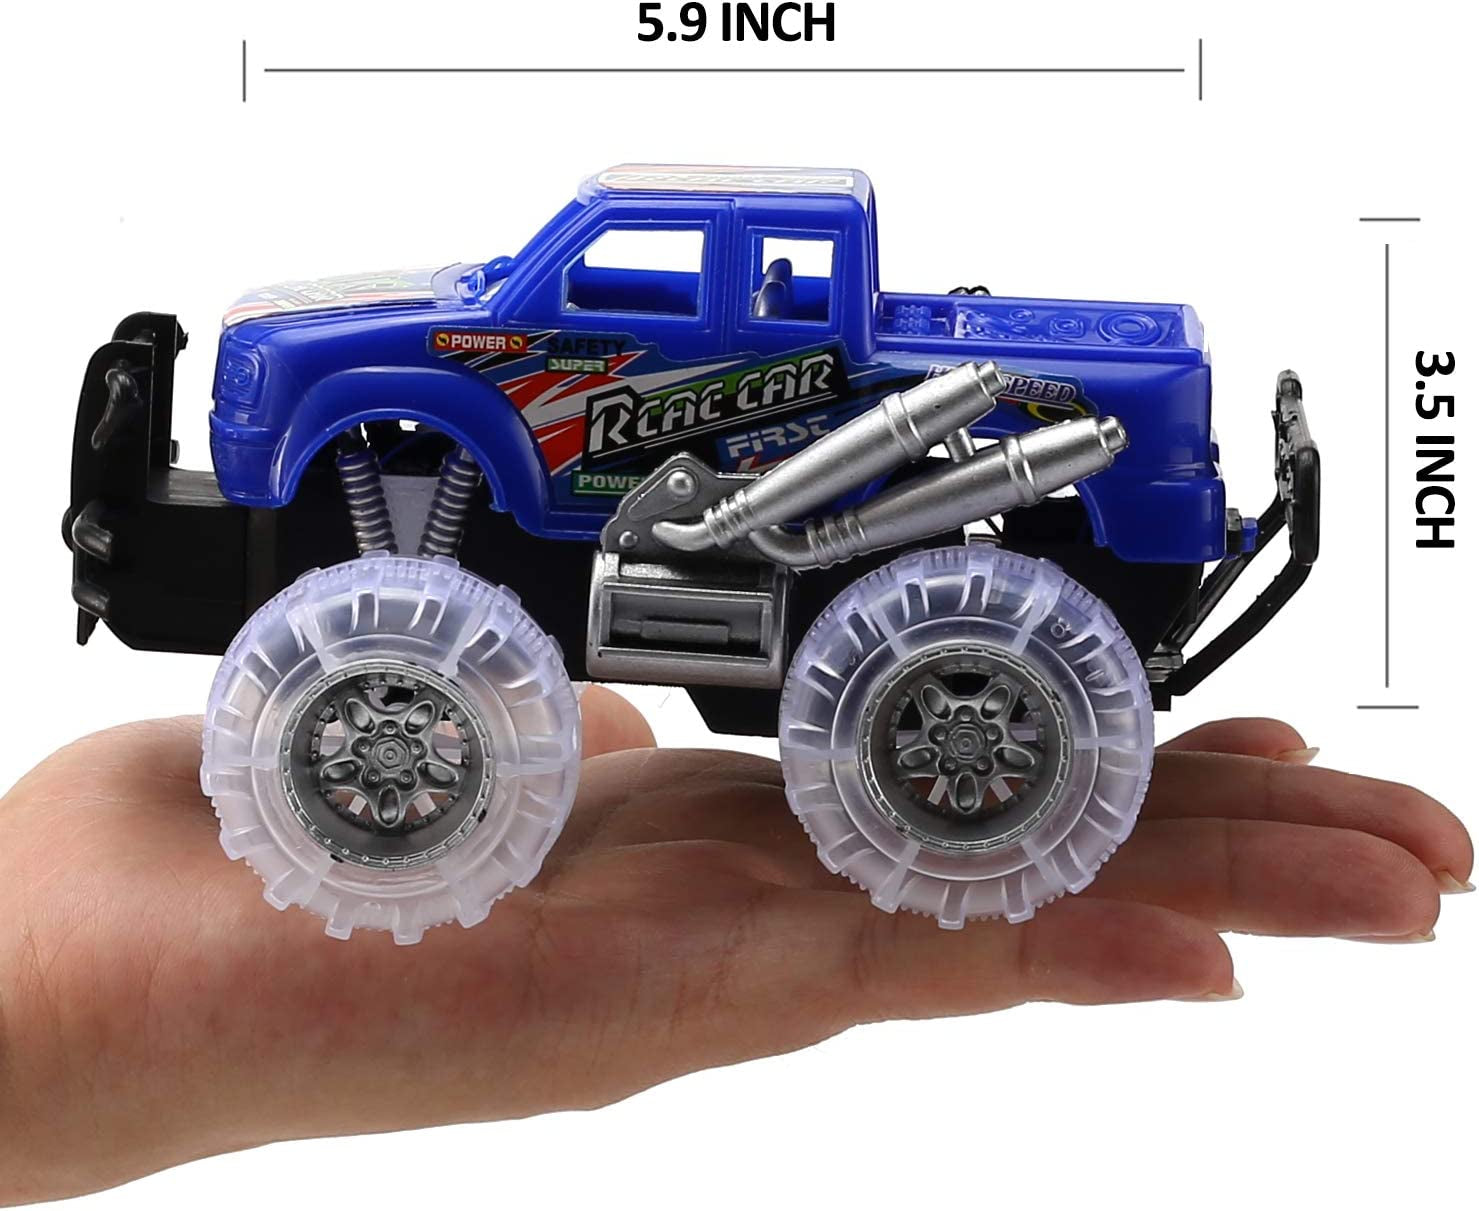 4 Pack 4 Colors Light up Monster Truck Set with Flashing LED Wheels, Best Gift for Boy and Girl Age 3+ Years Old. Push N Go Car, Monster Car Toy for Kids Child Toddler Birthday Party Favors